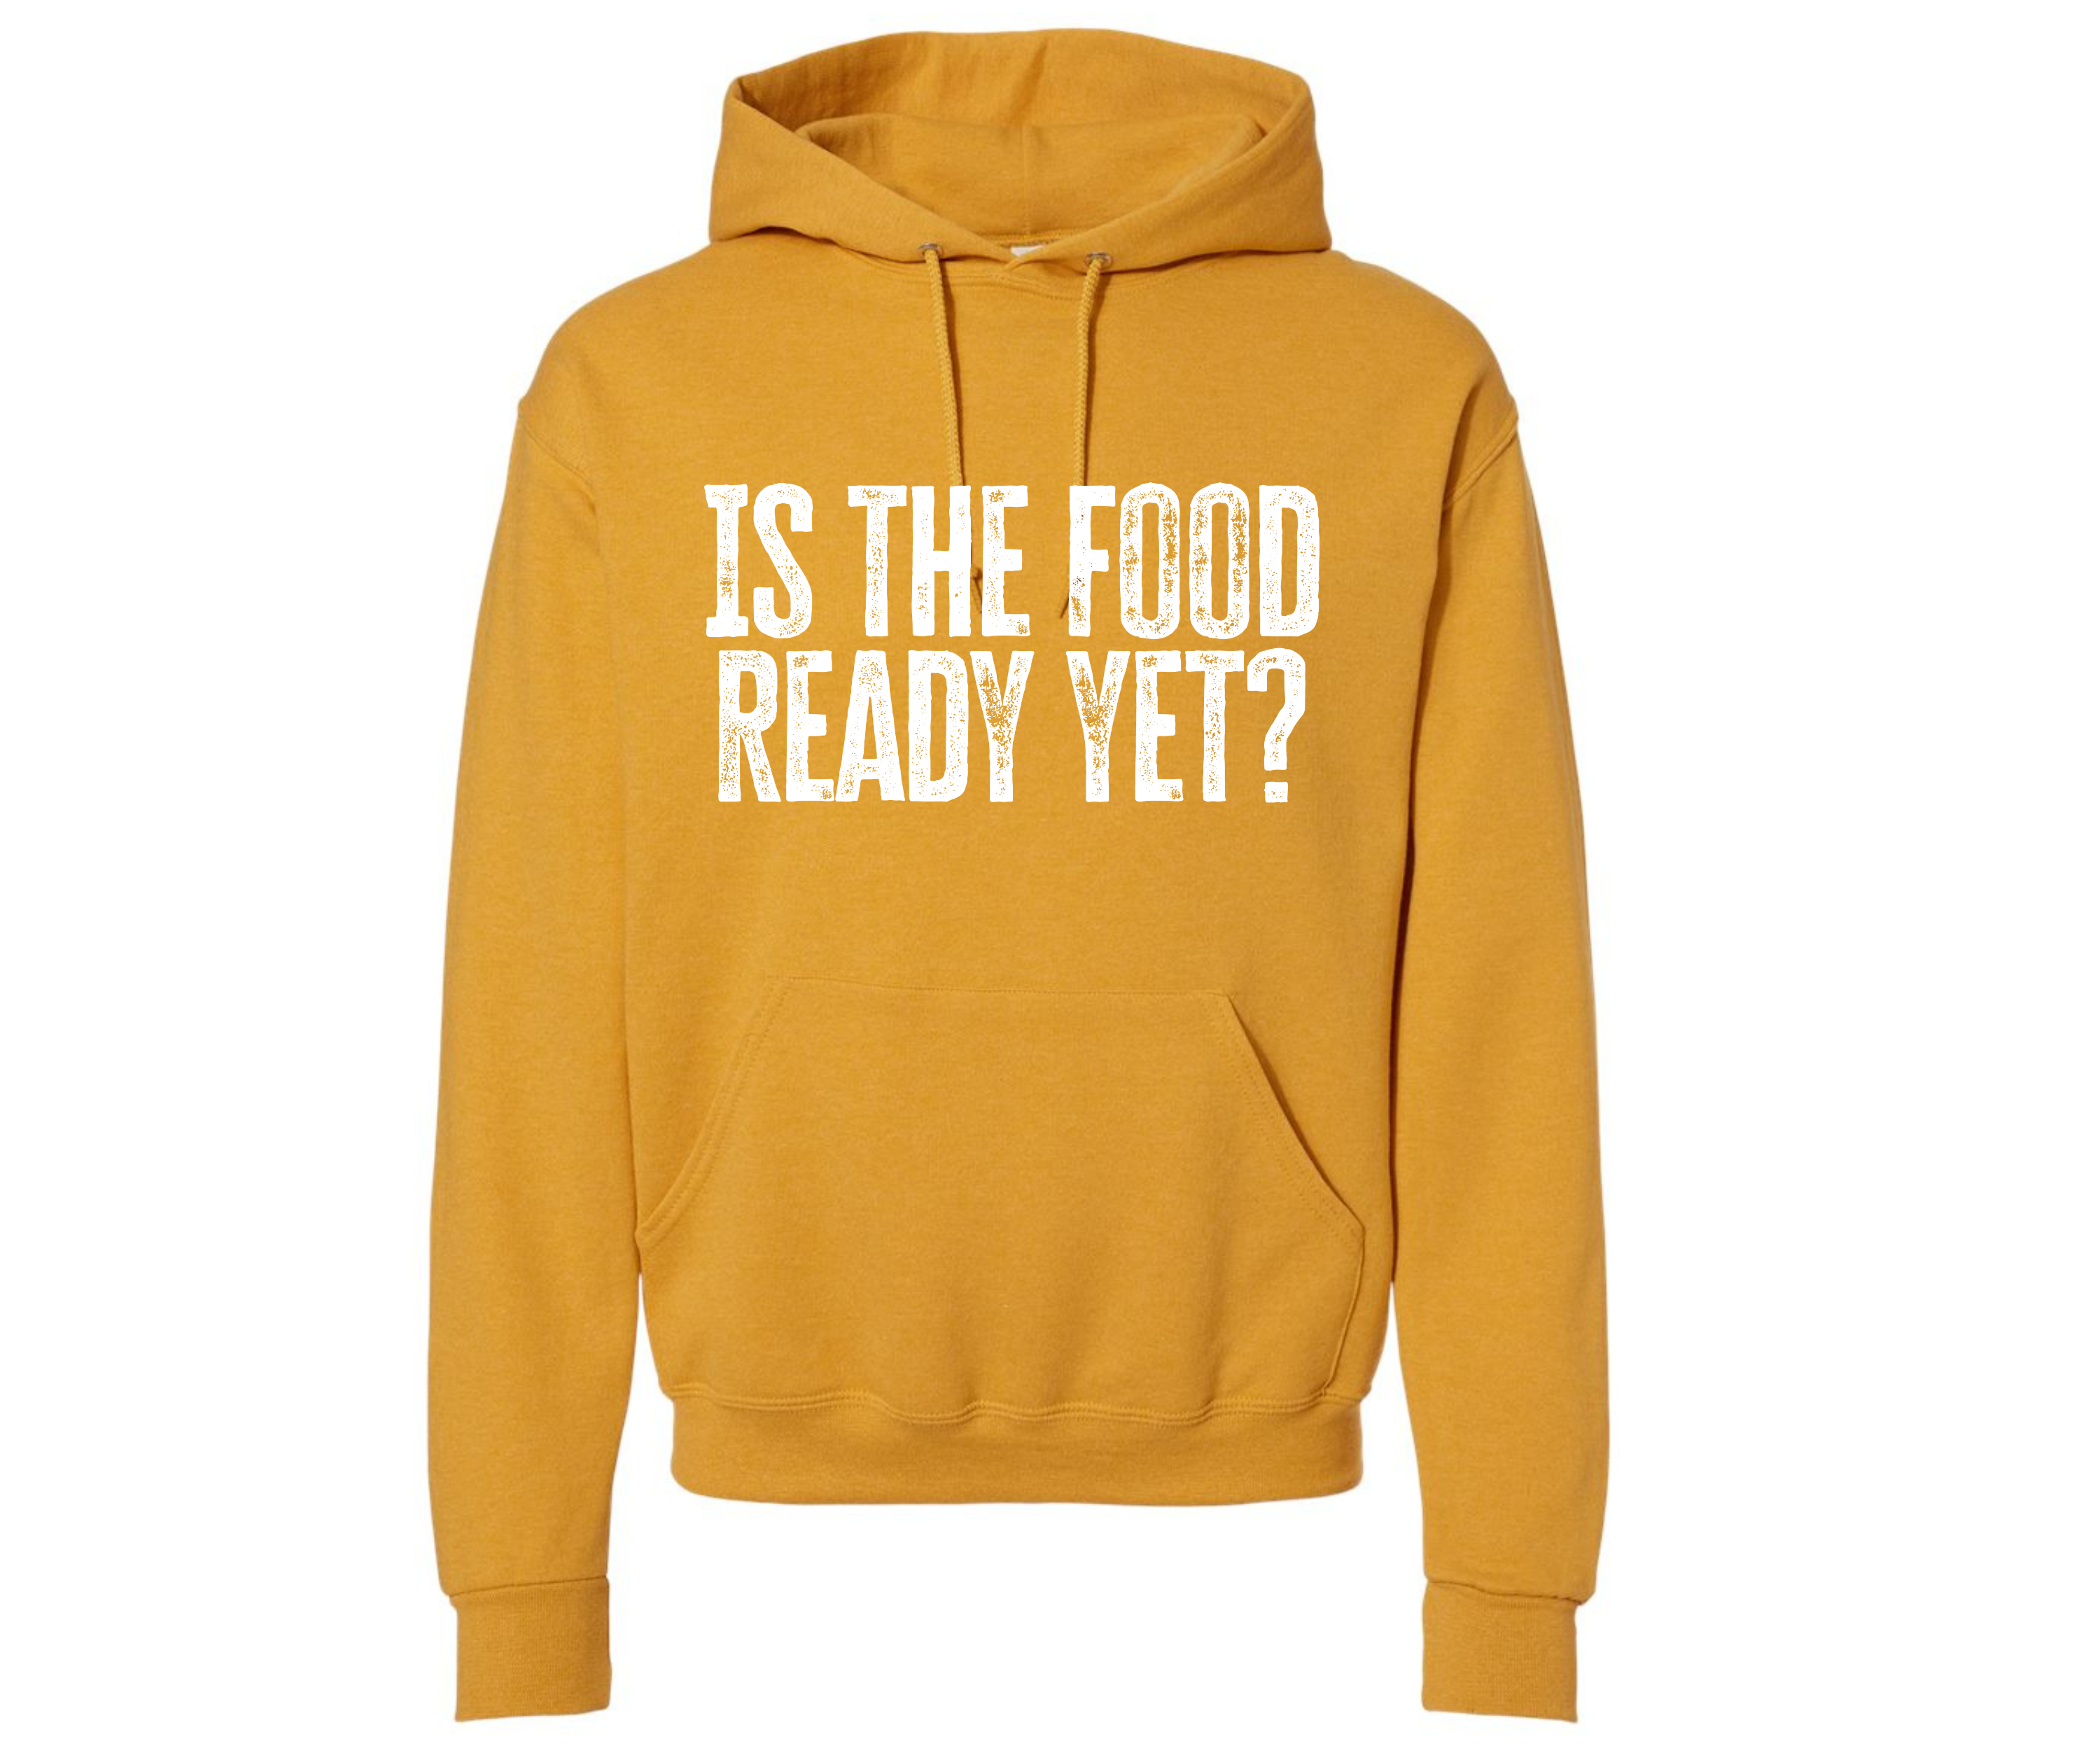 Is the Food Ready Yet? Unisex Family Matching Hooded Sweatshirt-clothing and culture-shop here at-A Perfect Shirt